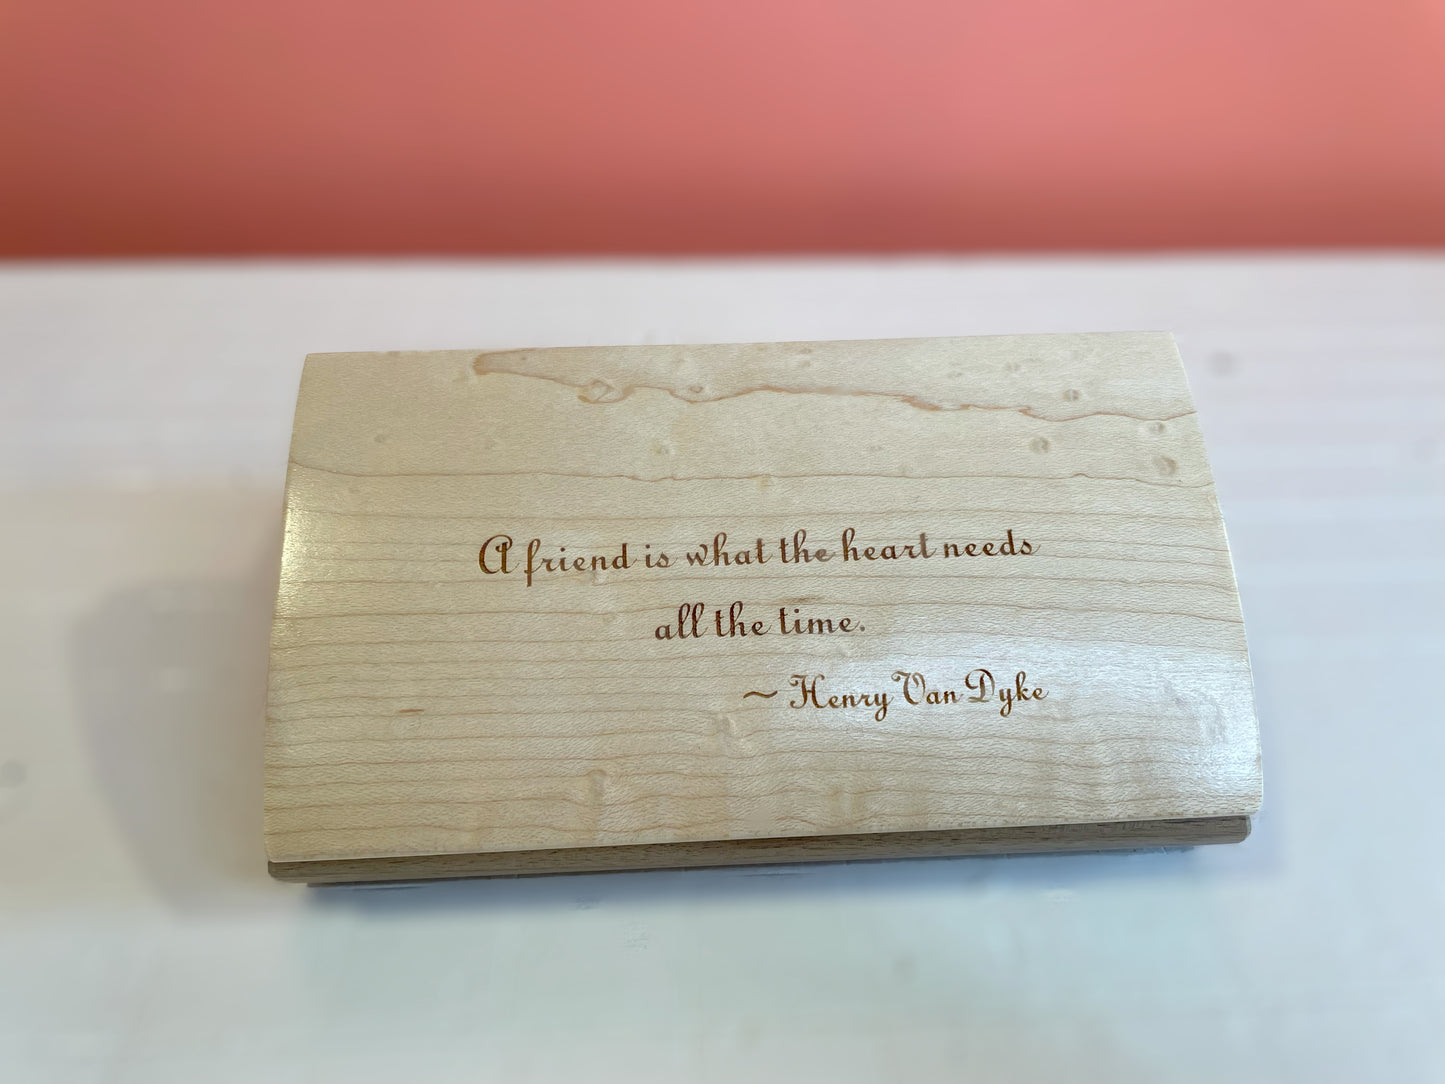 Mikutowski Woodworking Inspirational Box - A Friend Is What The Heart Needs available at The Good Life Boutique